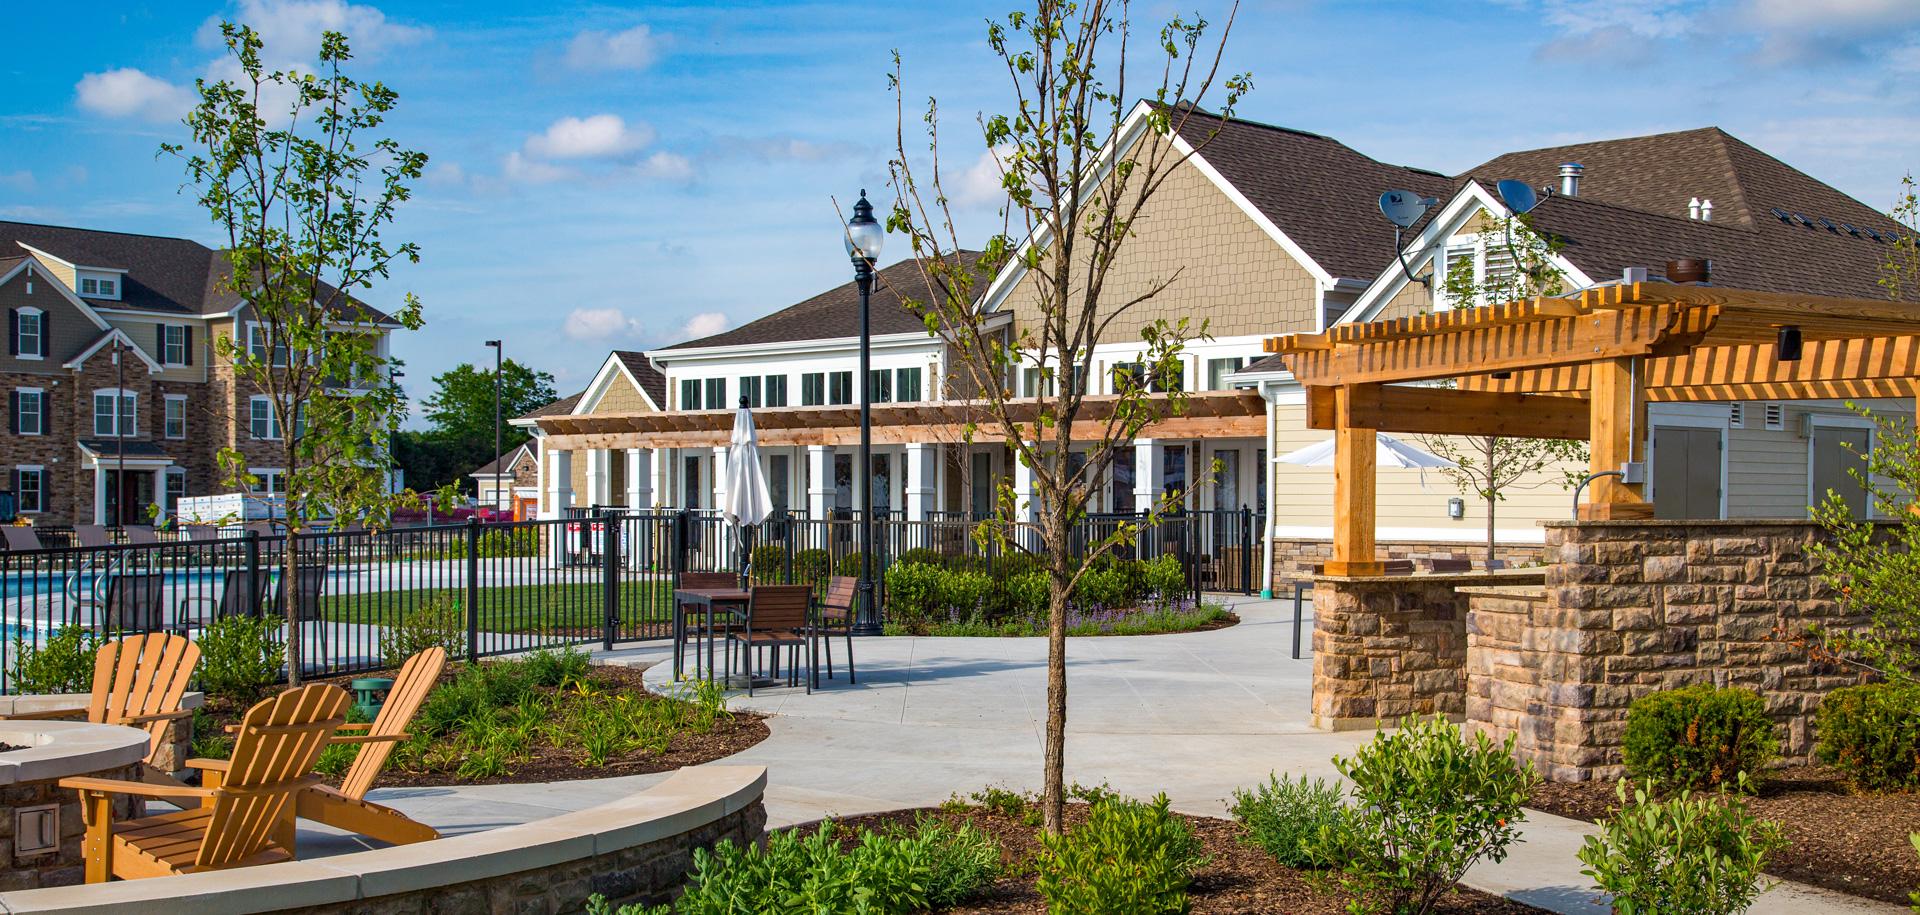 Image of the Clubhouse at Tapestry Naperville